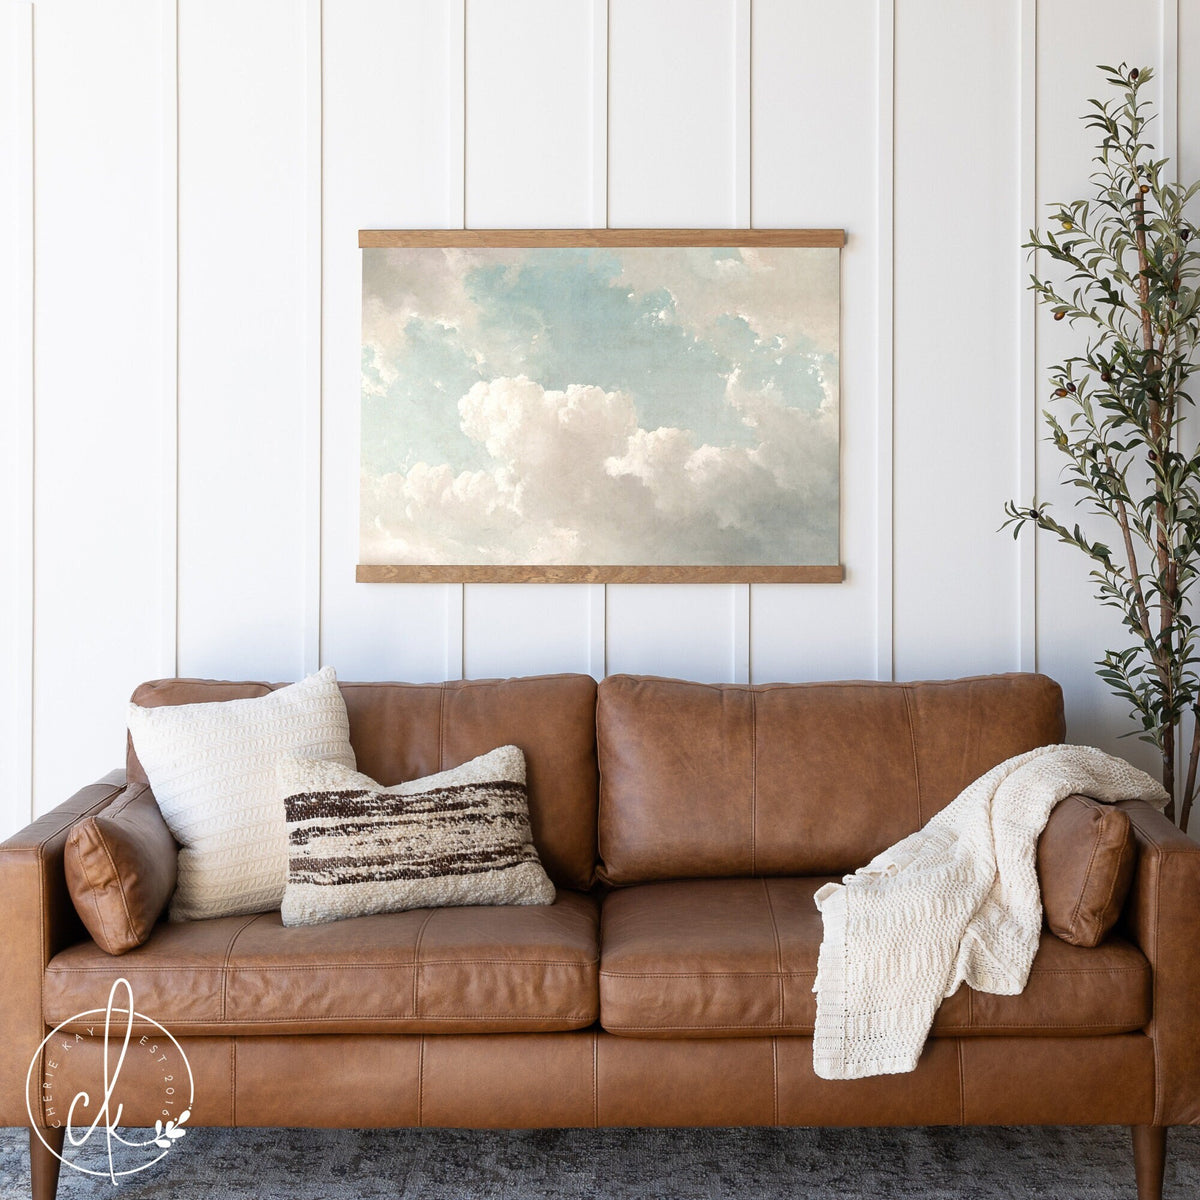 Cloud Painting Canvas Tapestry | Sky Painting | Entryway Decor | Fabric Wall Hanging | Living Room Wall Decor | Cloud Painting